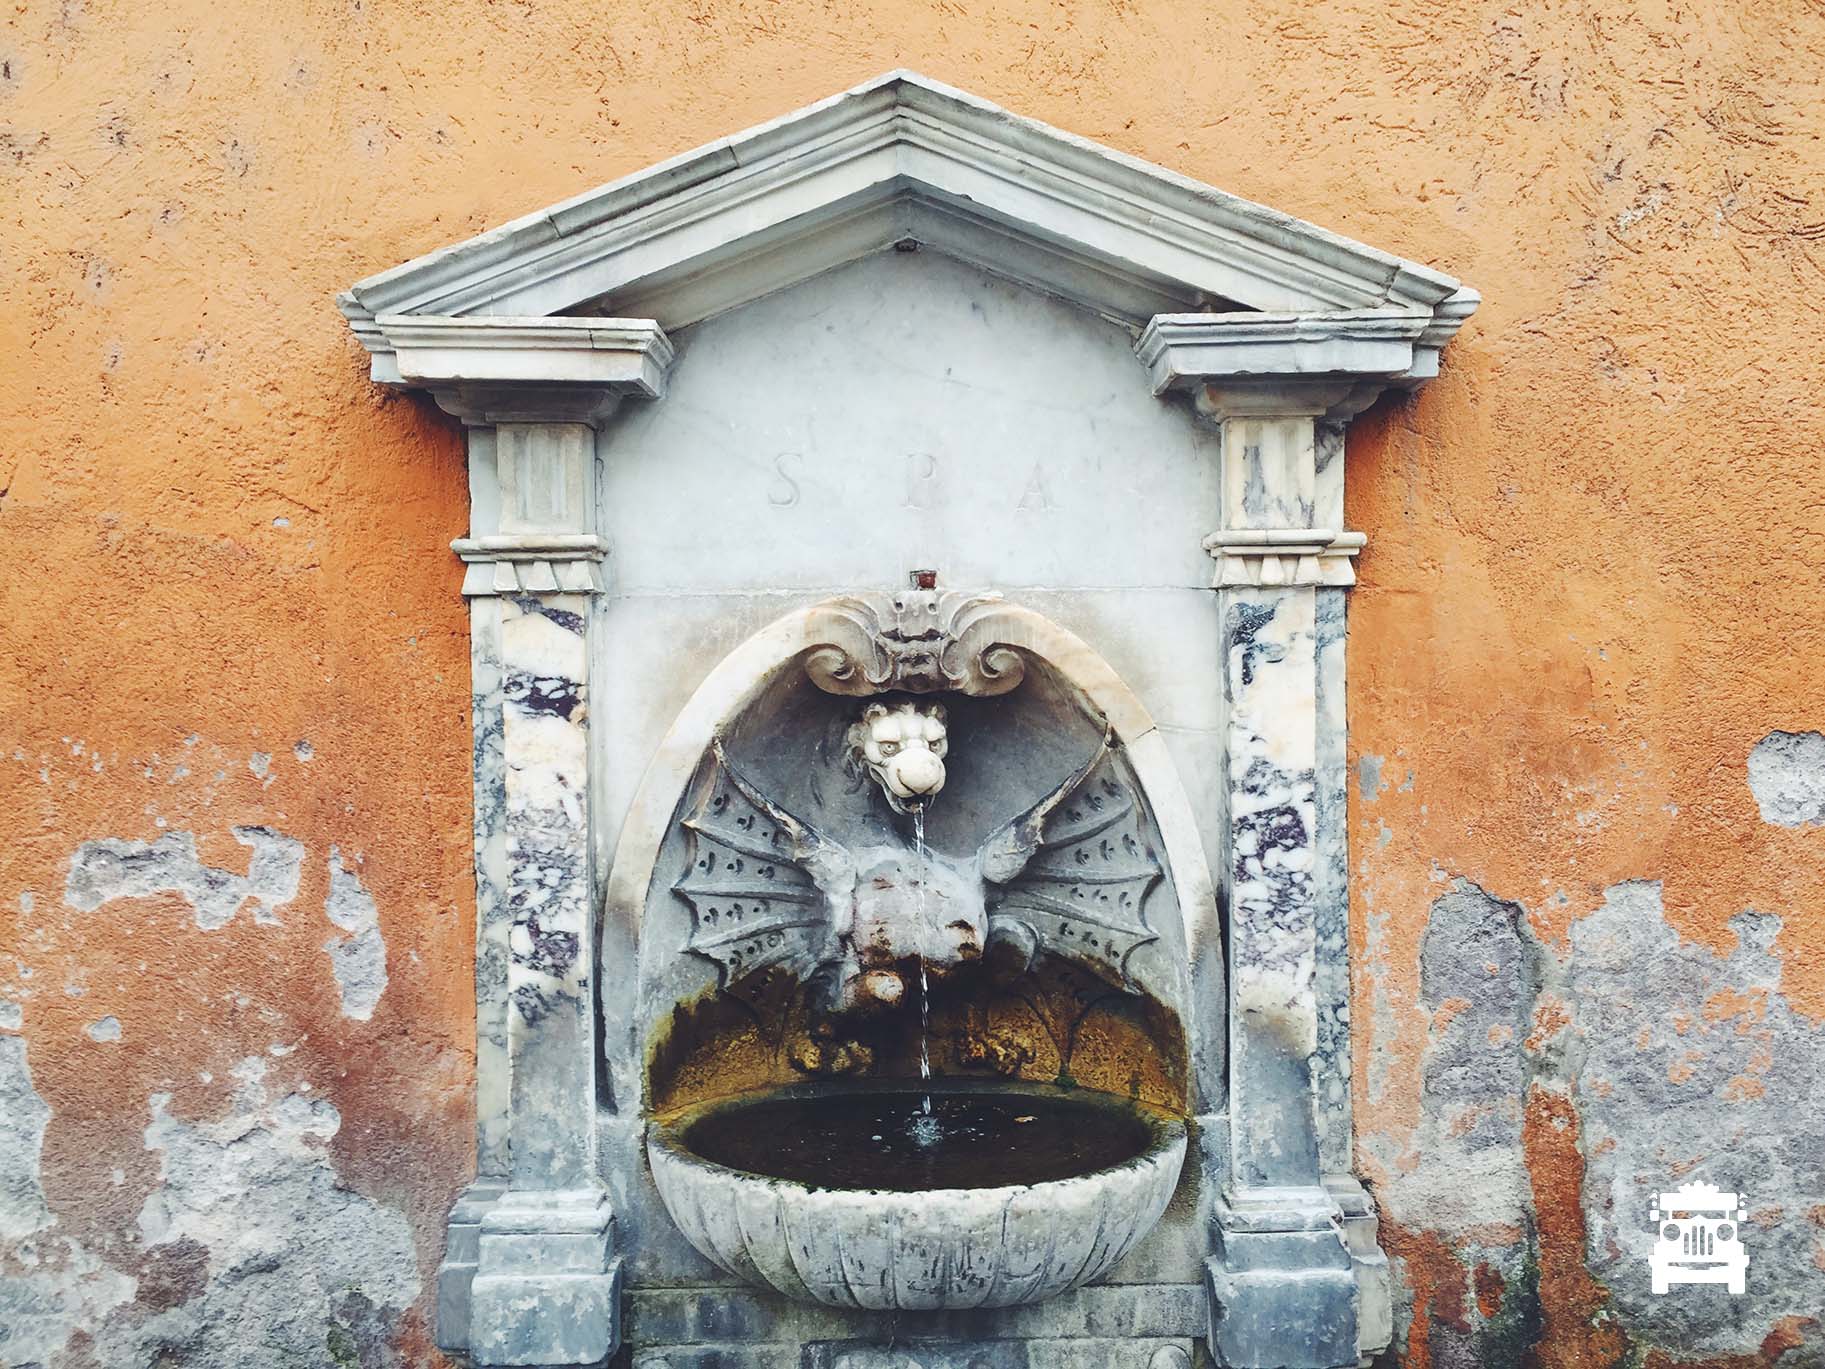 A beautiful water fountain I spotted on our walk